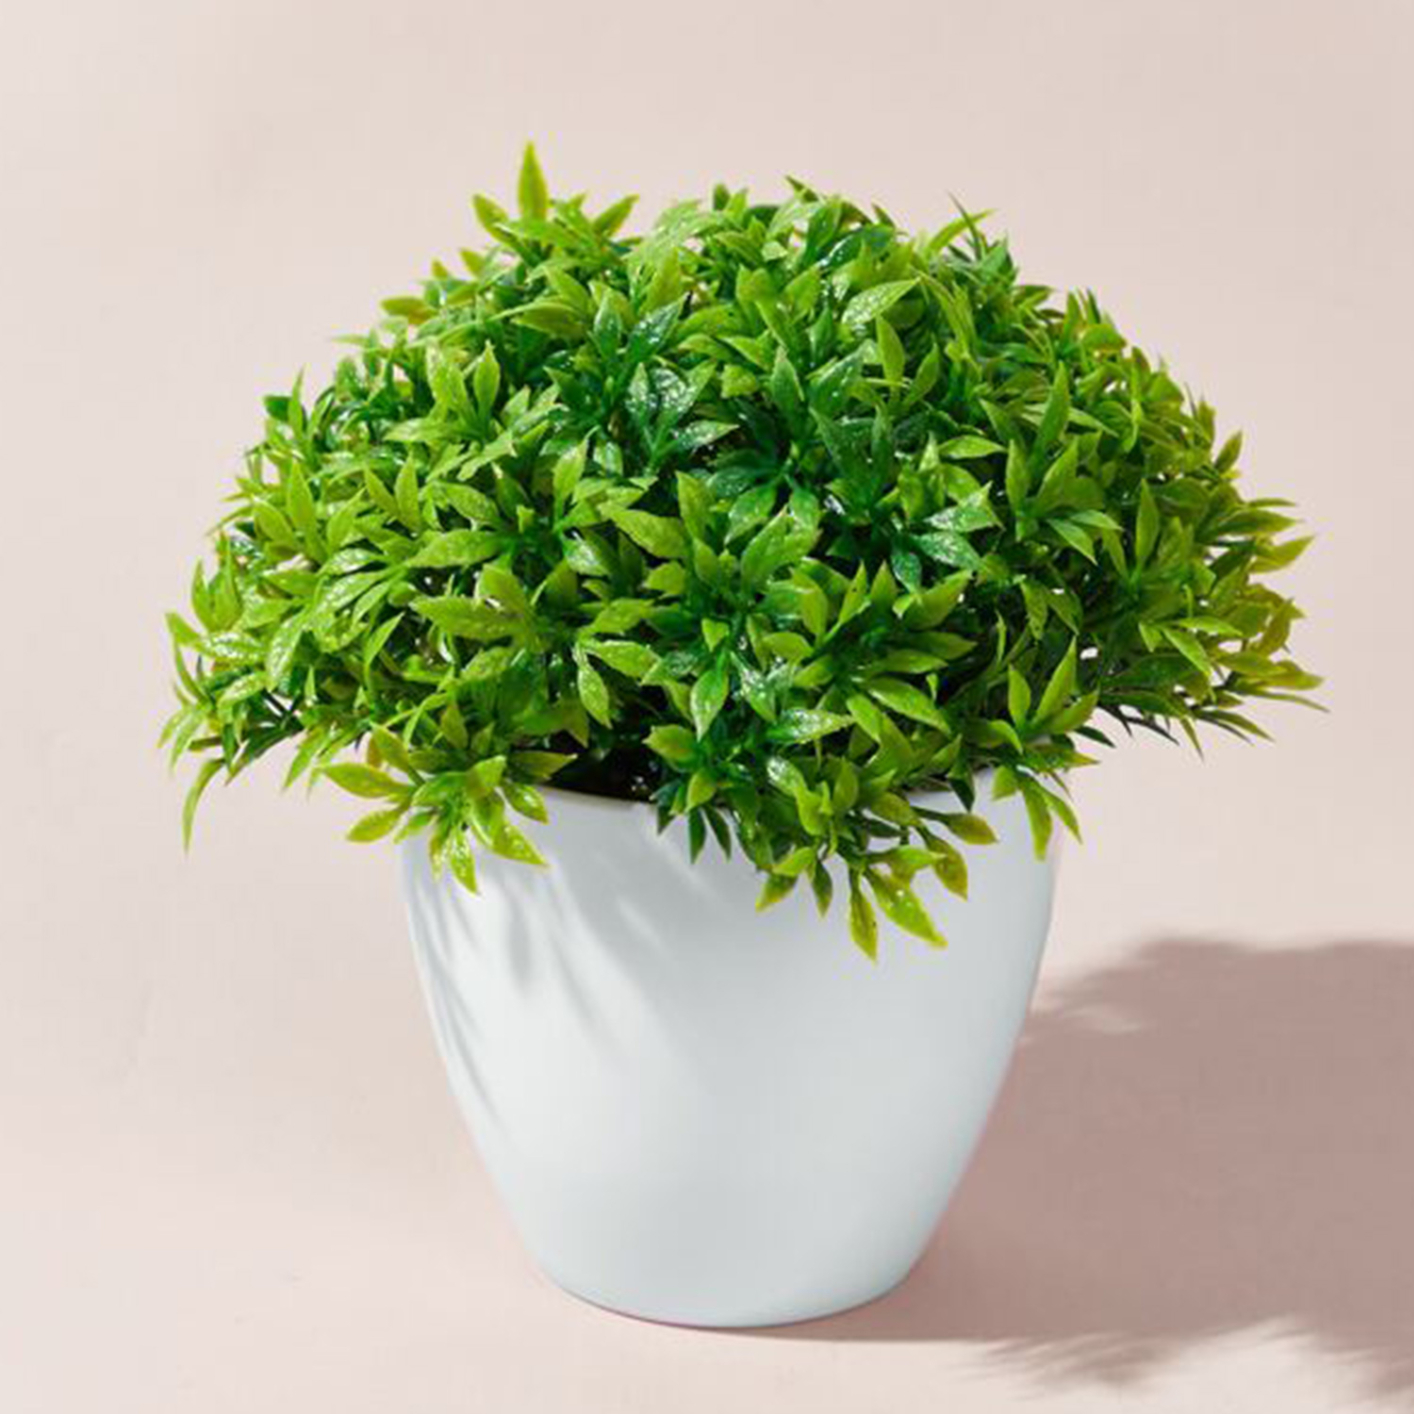 Artificial Potted Plants Mini Fake Plants, Greenery Green Grass Potted Faux Decorative Grass Plant with Plastic Pot for Home Decor, Indoor, Office, Desk, Table Decoration